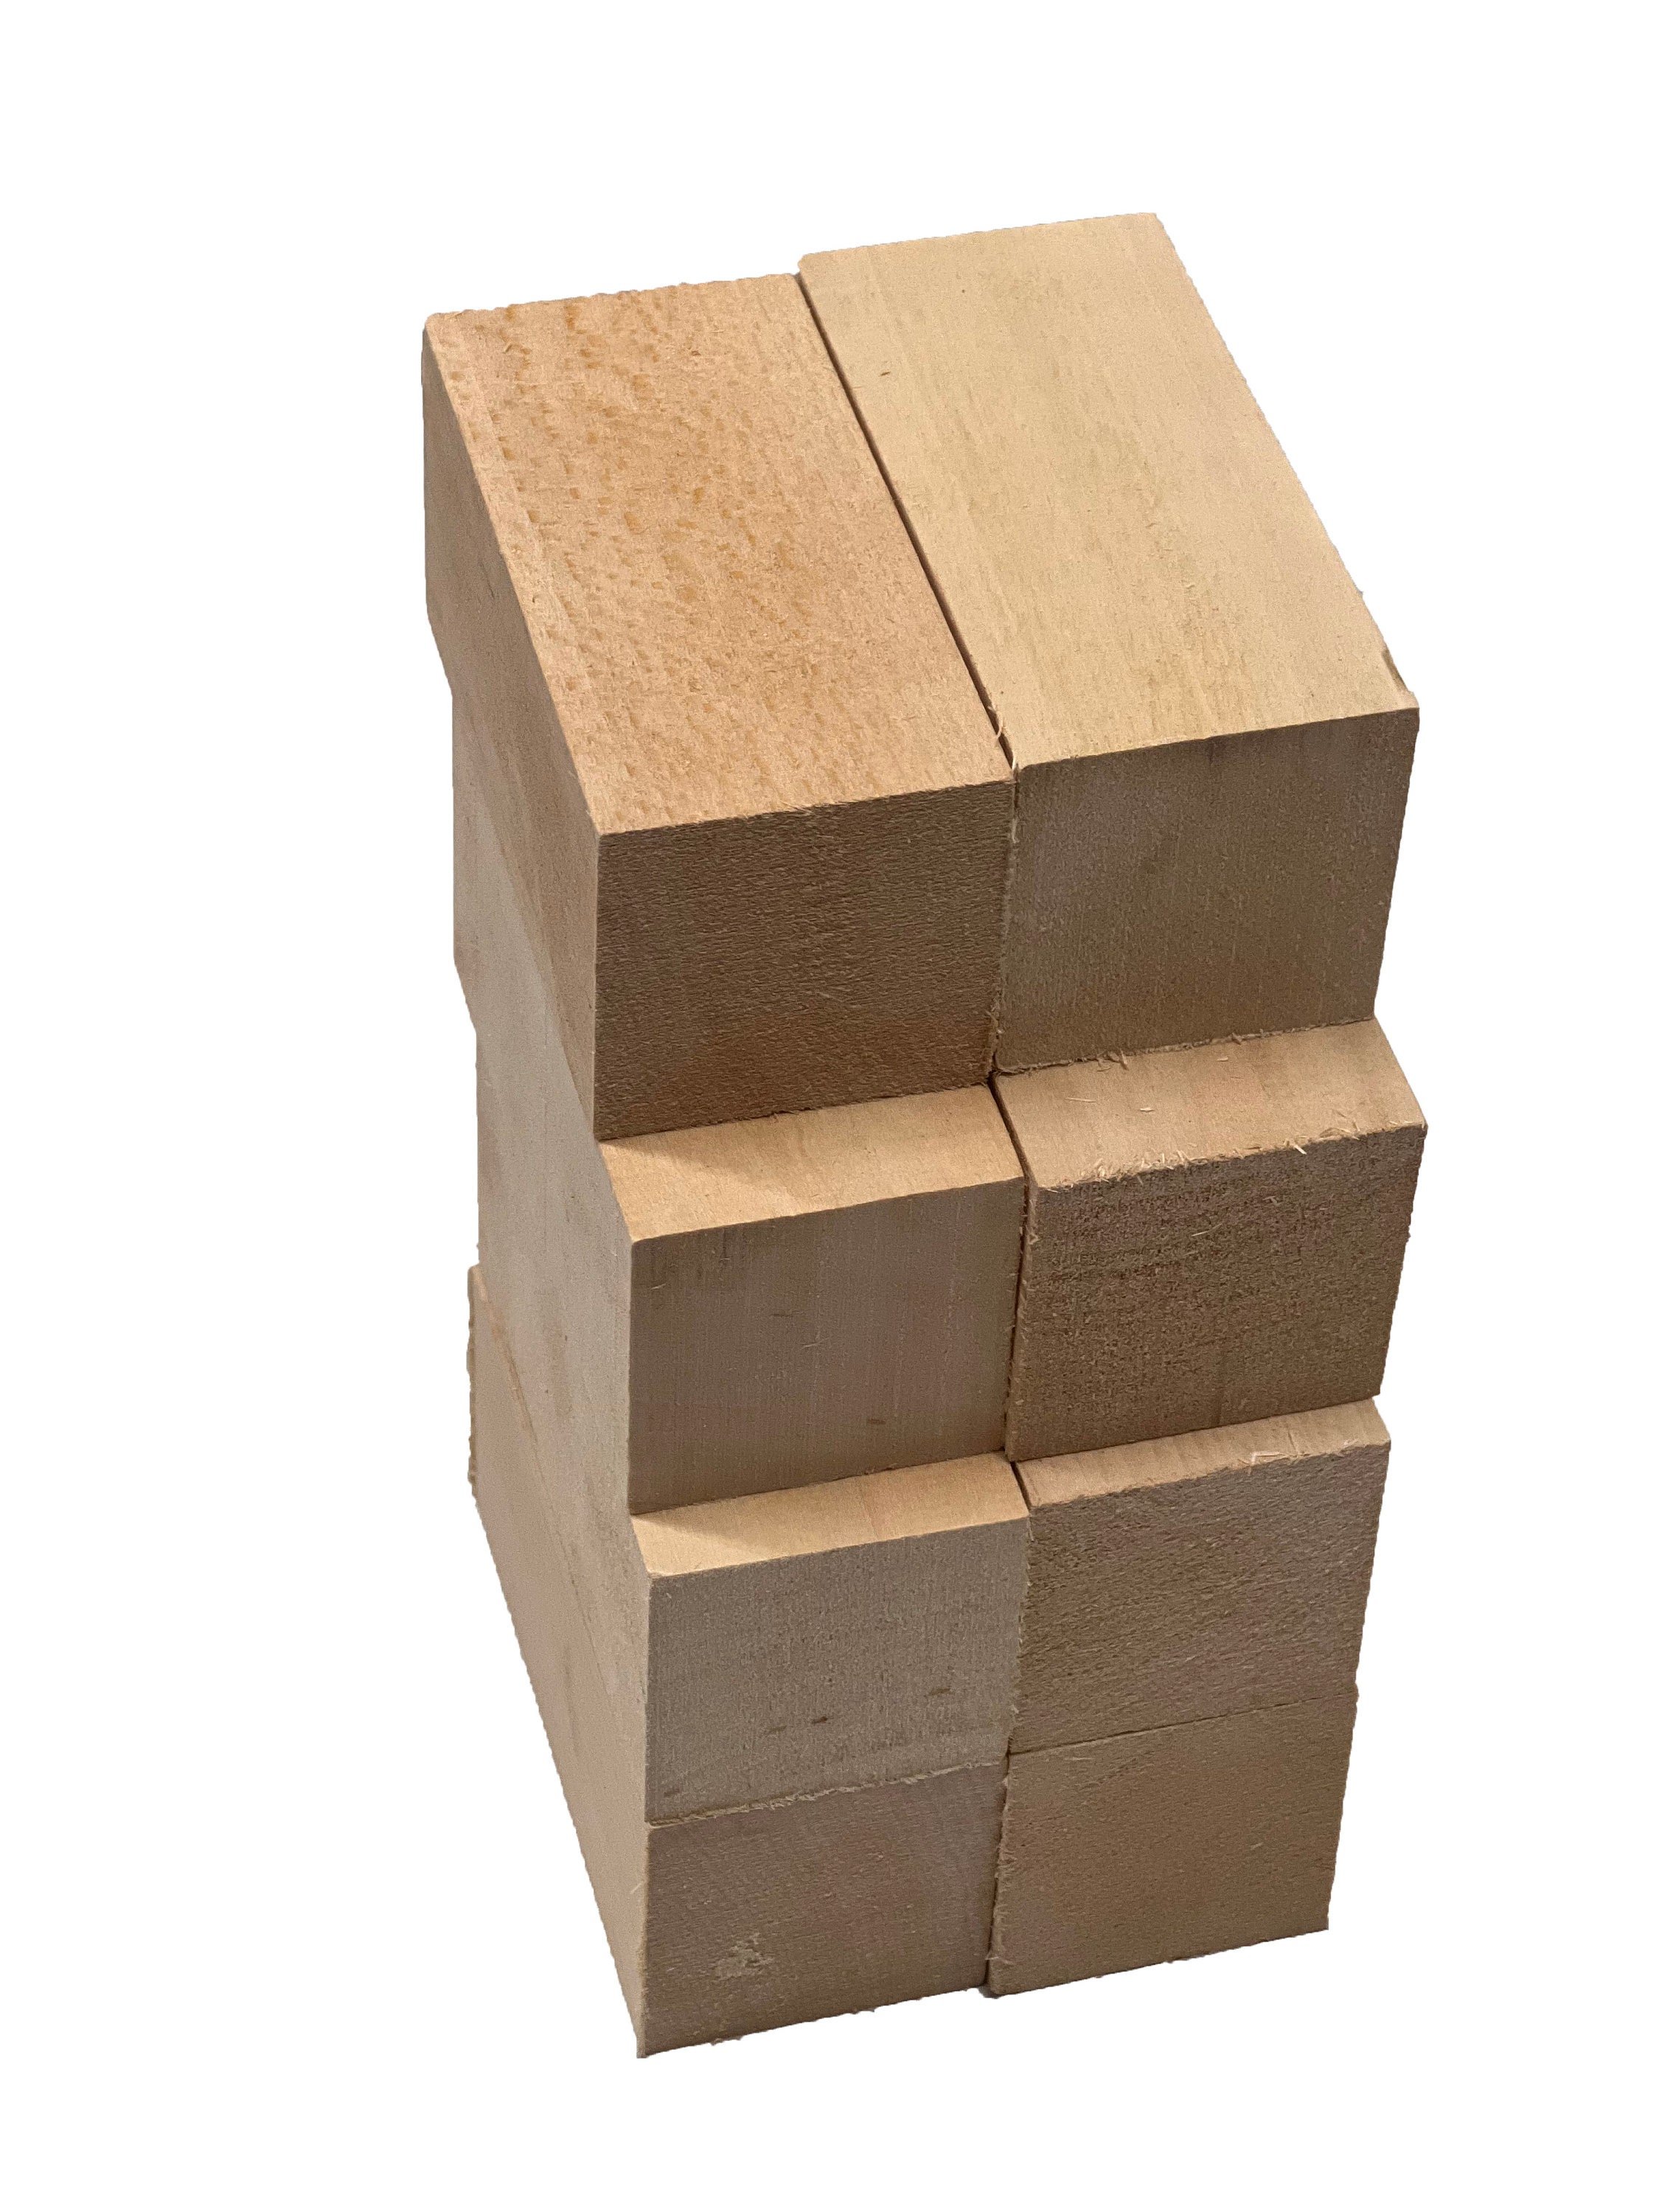 Basswood Blocks for Carving (8 Pieces - 2 x 2 x 5) - Wood Carving Kit  with Unfinished Whittling Wood Blank Blocks